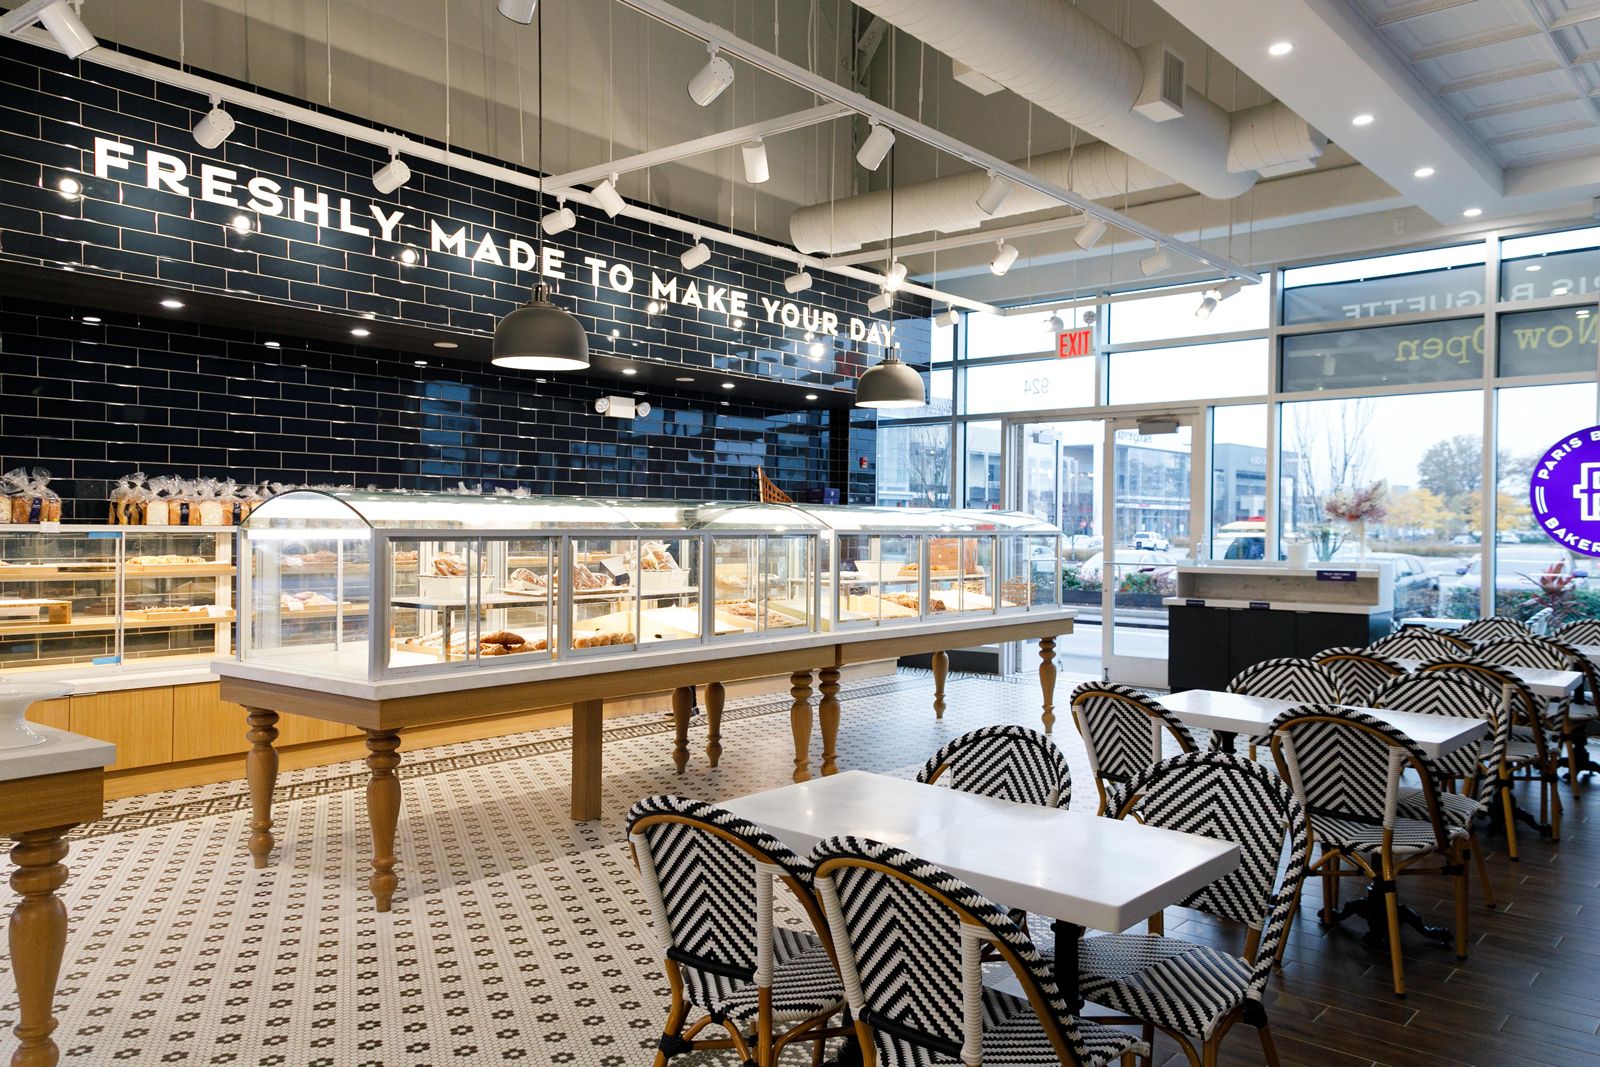 Paris Baguette Continues To Dominate the Bakery Franchise Industry; Signs Agreement in Plainsboro